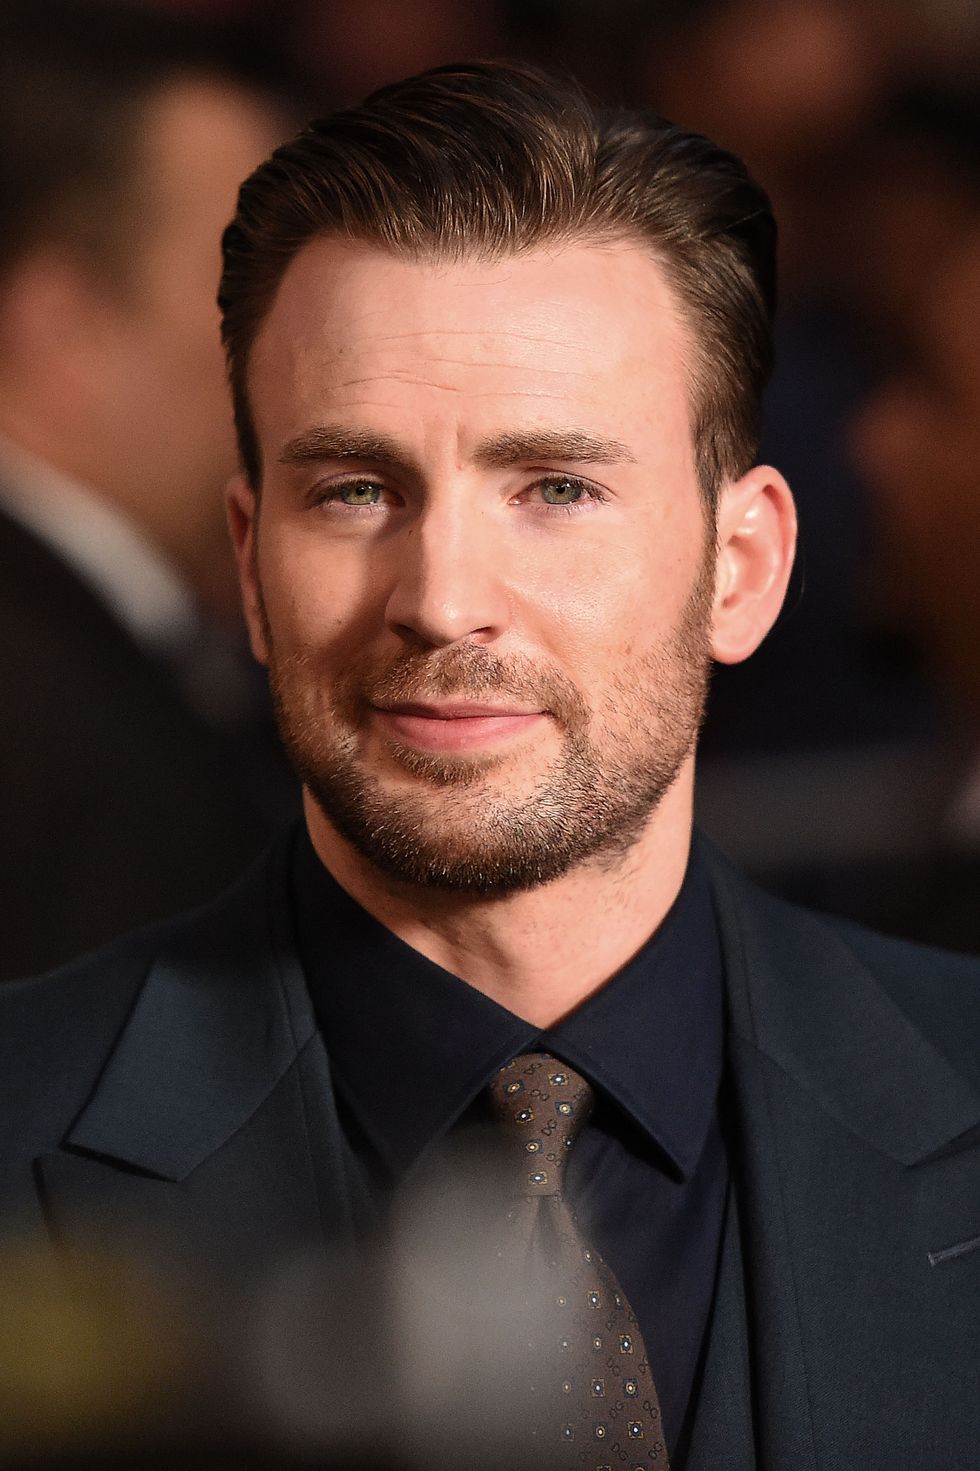 hollywood, ca   september 02  actor chris evans attends the premiere of radius and g4 productions before we go at arclight cinemas on september 2, 2015 in hollywood, california  photo by mike windlegetty images